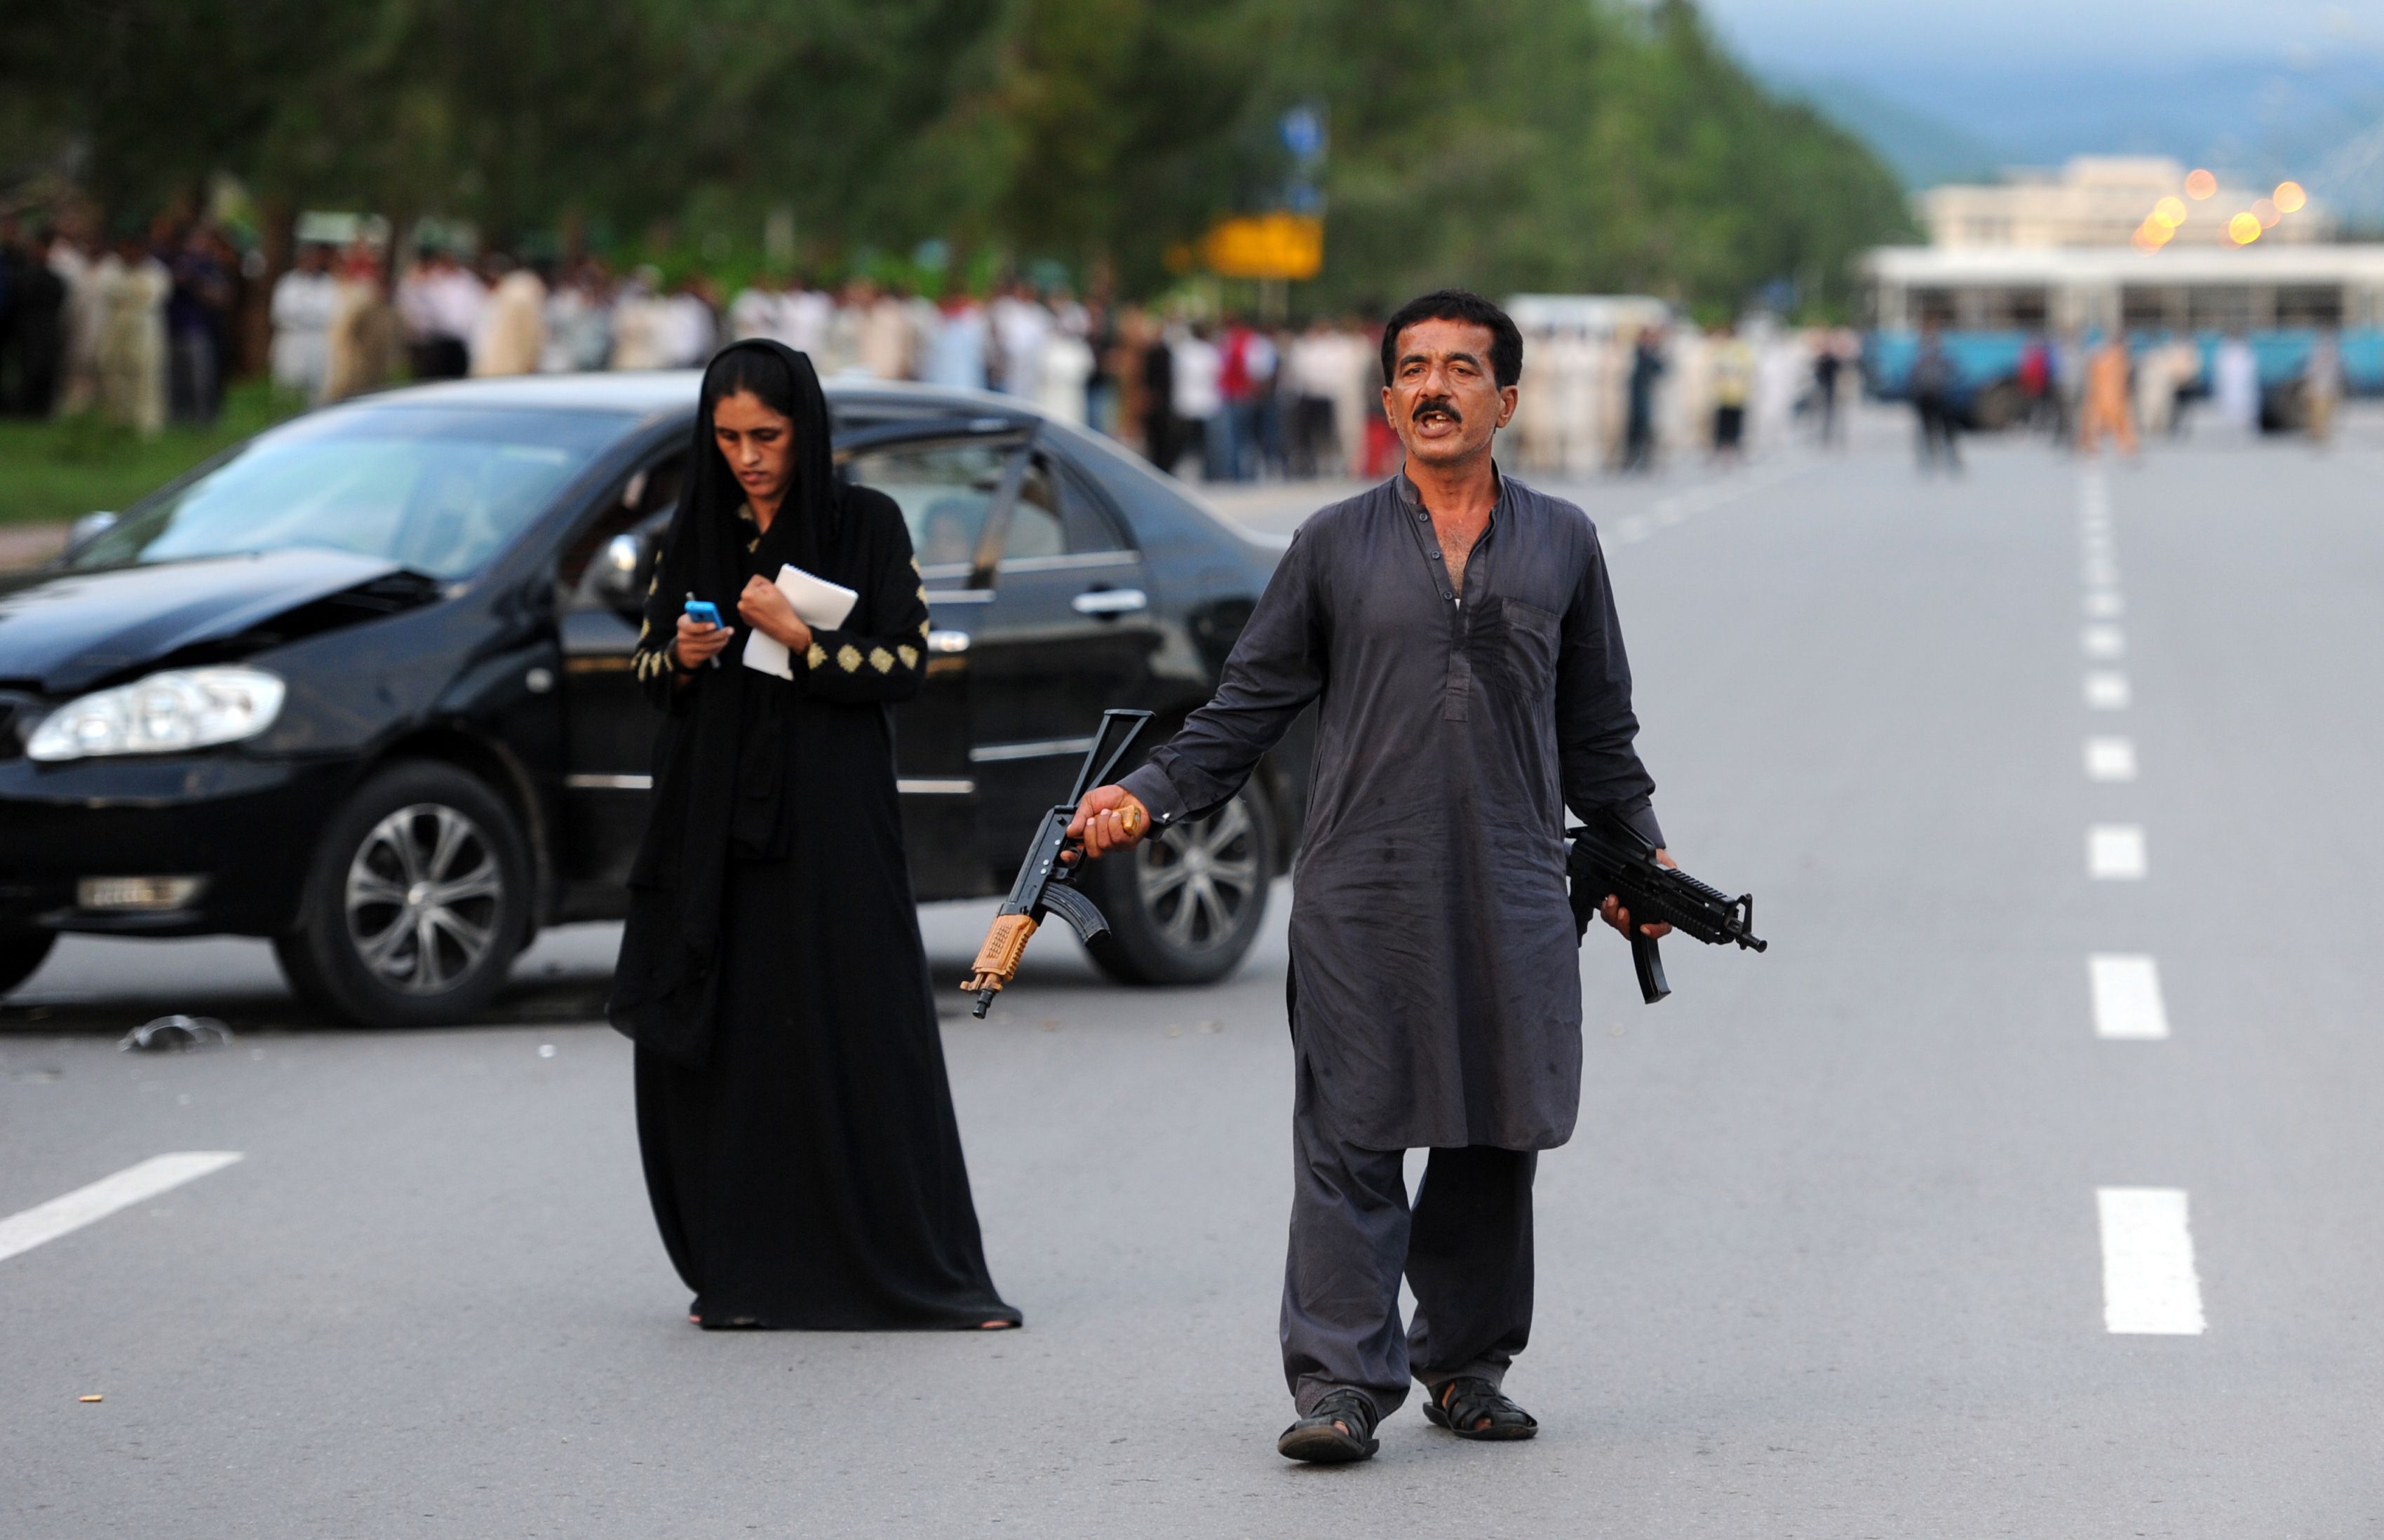 A Pakistani gunman stands next to his wife during a standoff with police in Islamabad. Photo: AFP